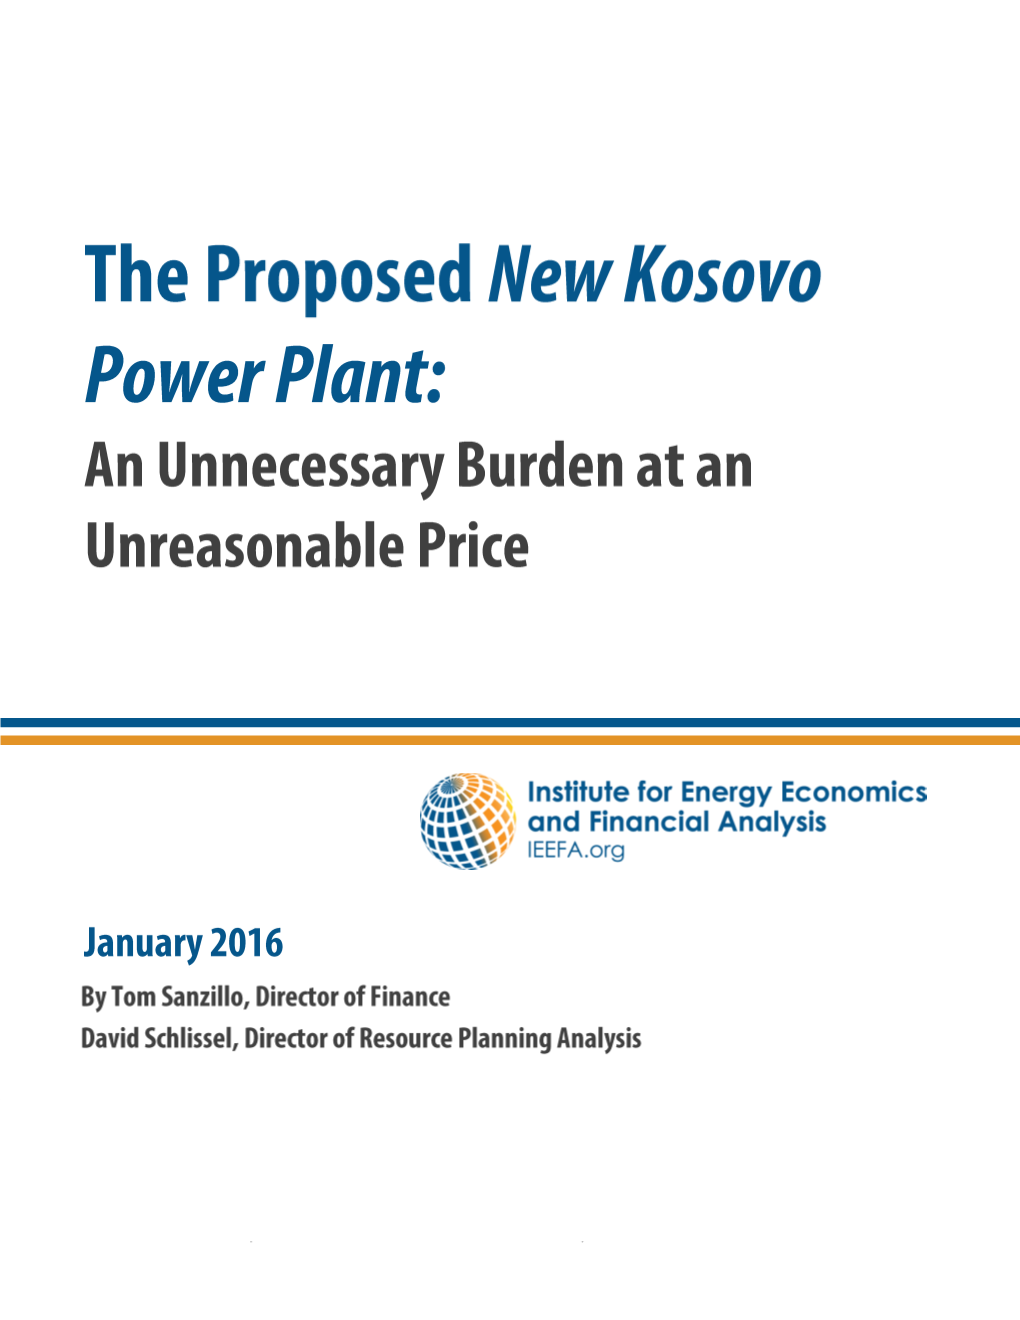 The Proposed New Kosovo Power Plant